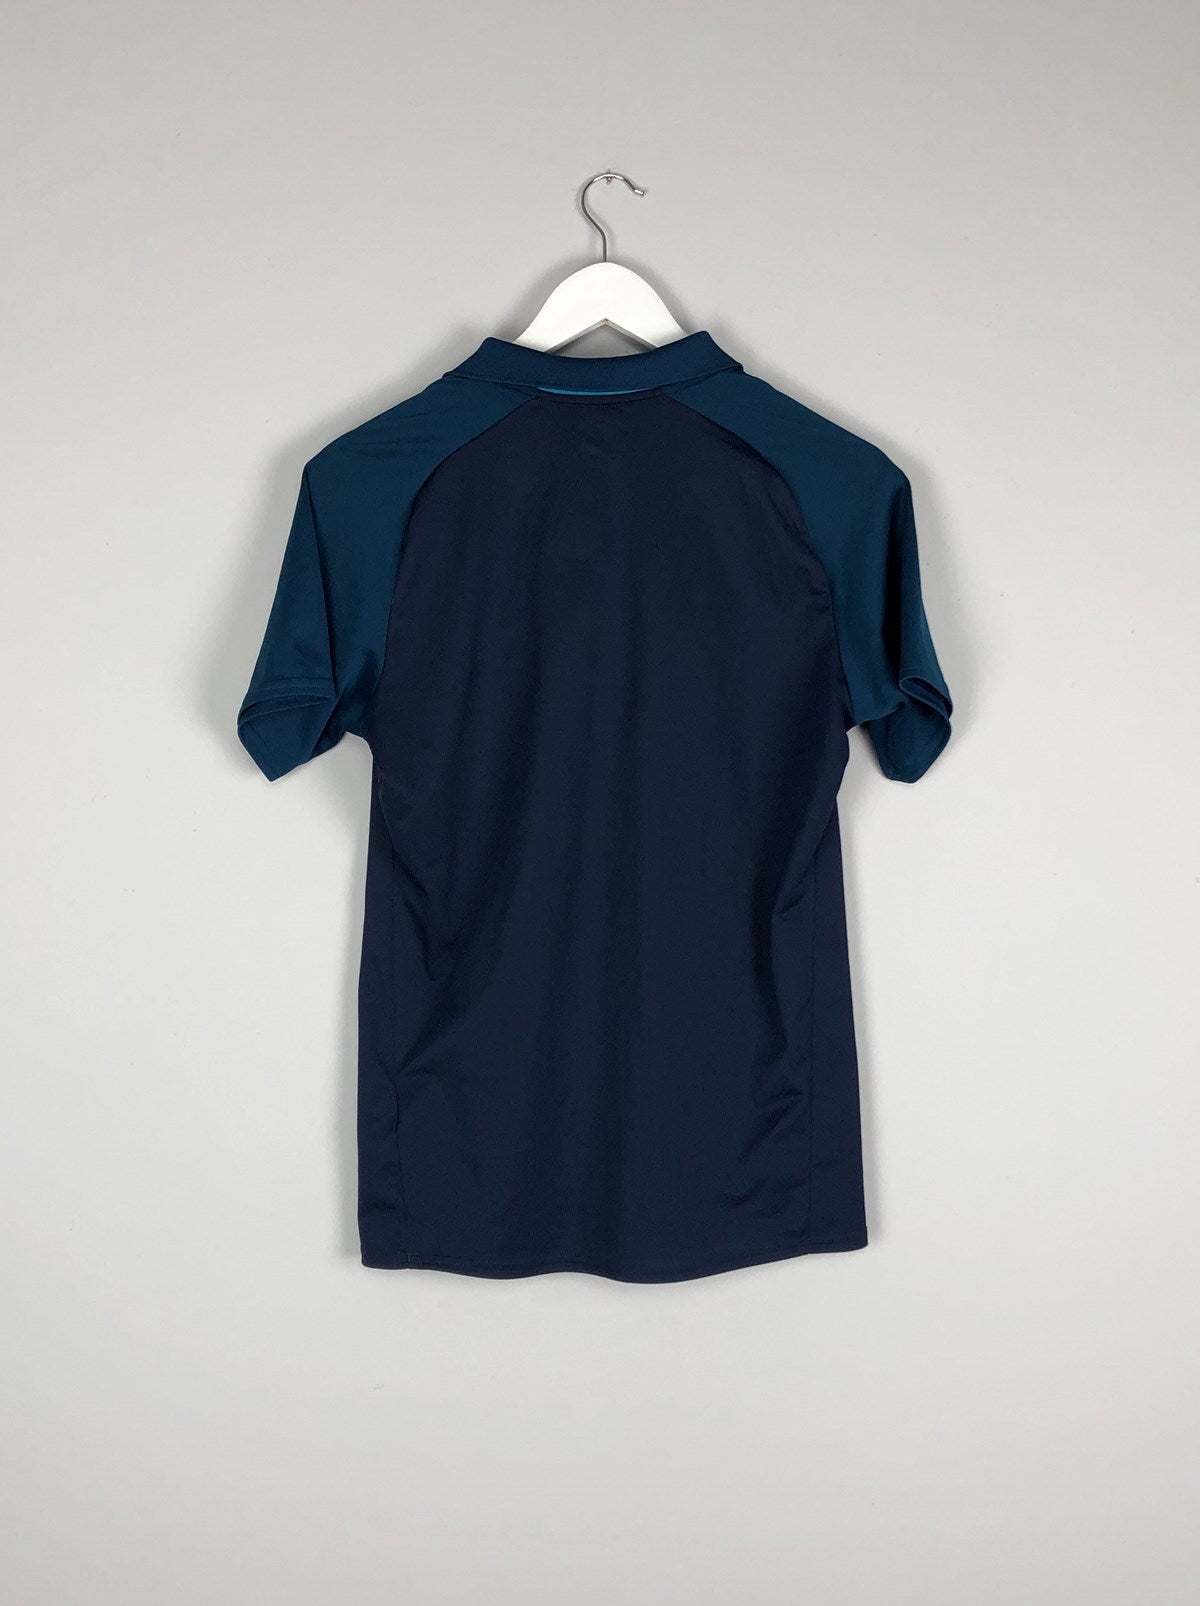 2019/20 WATERFORD FC UMBRO TRAINING POLO SHIRT (S)